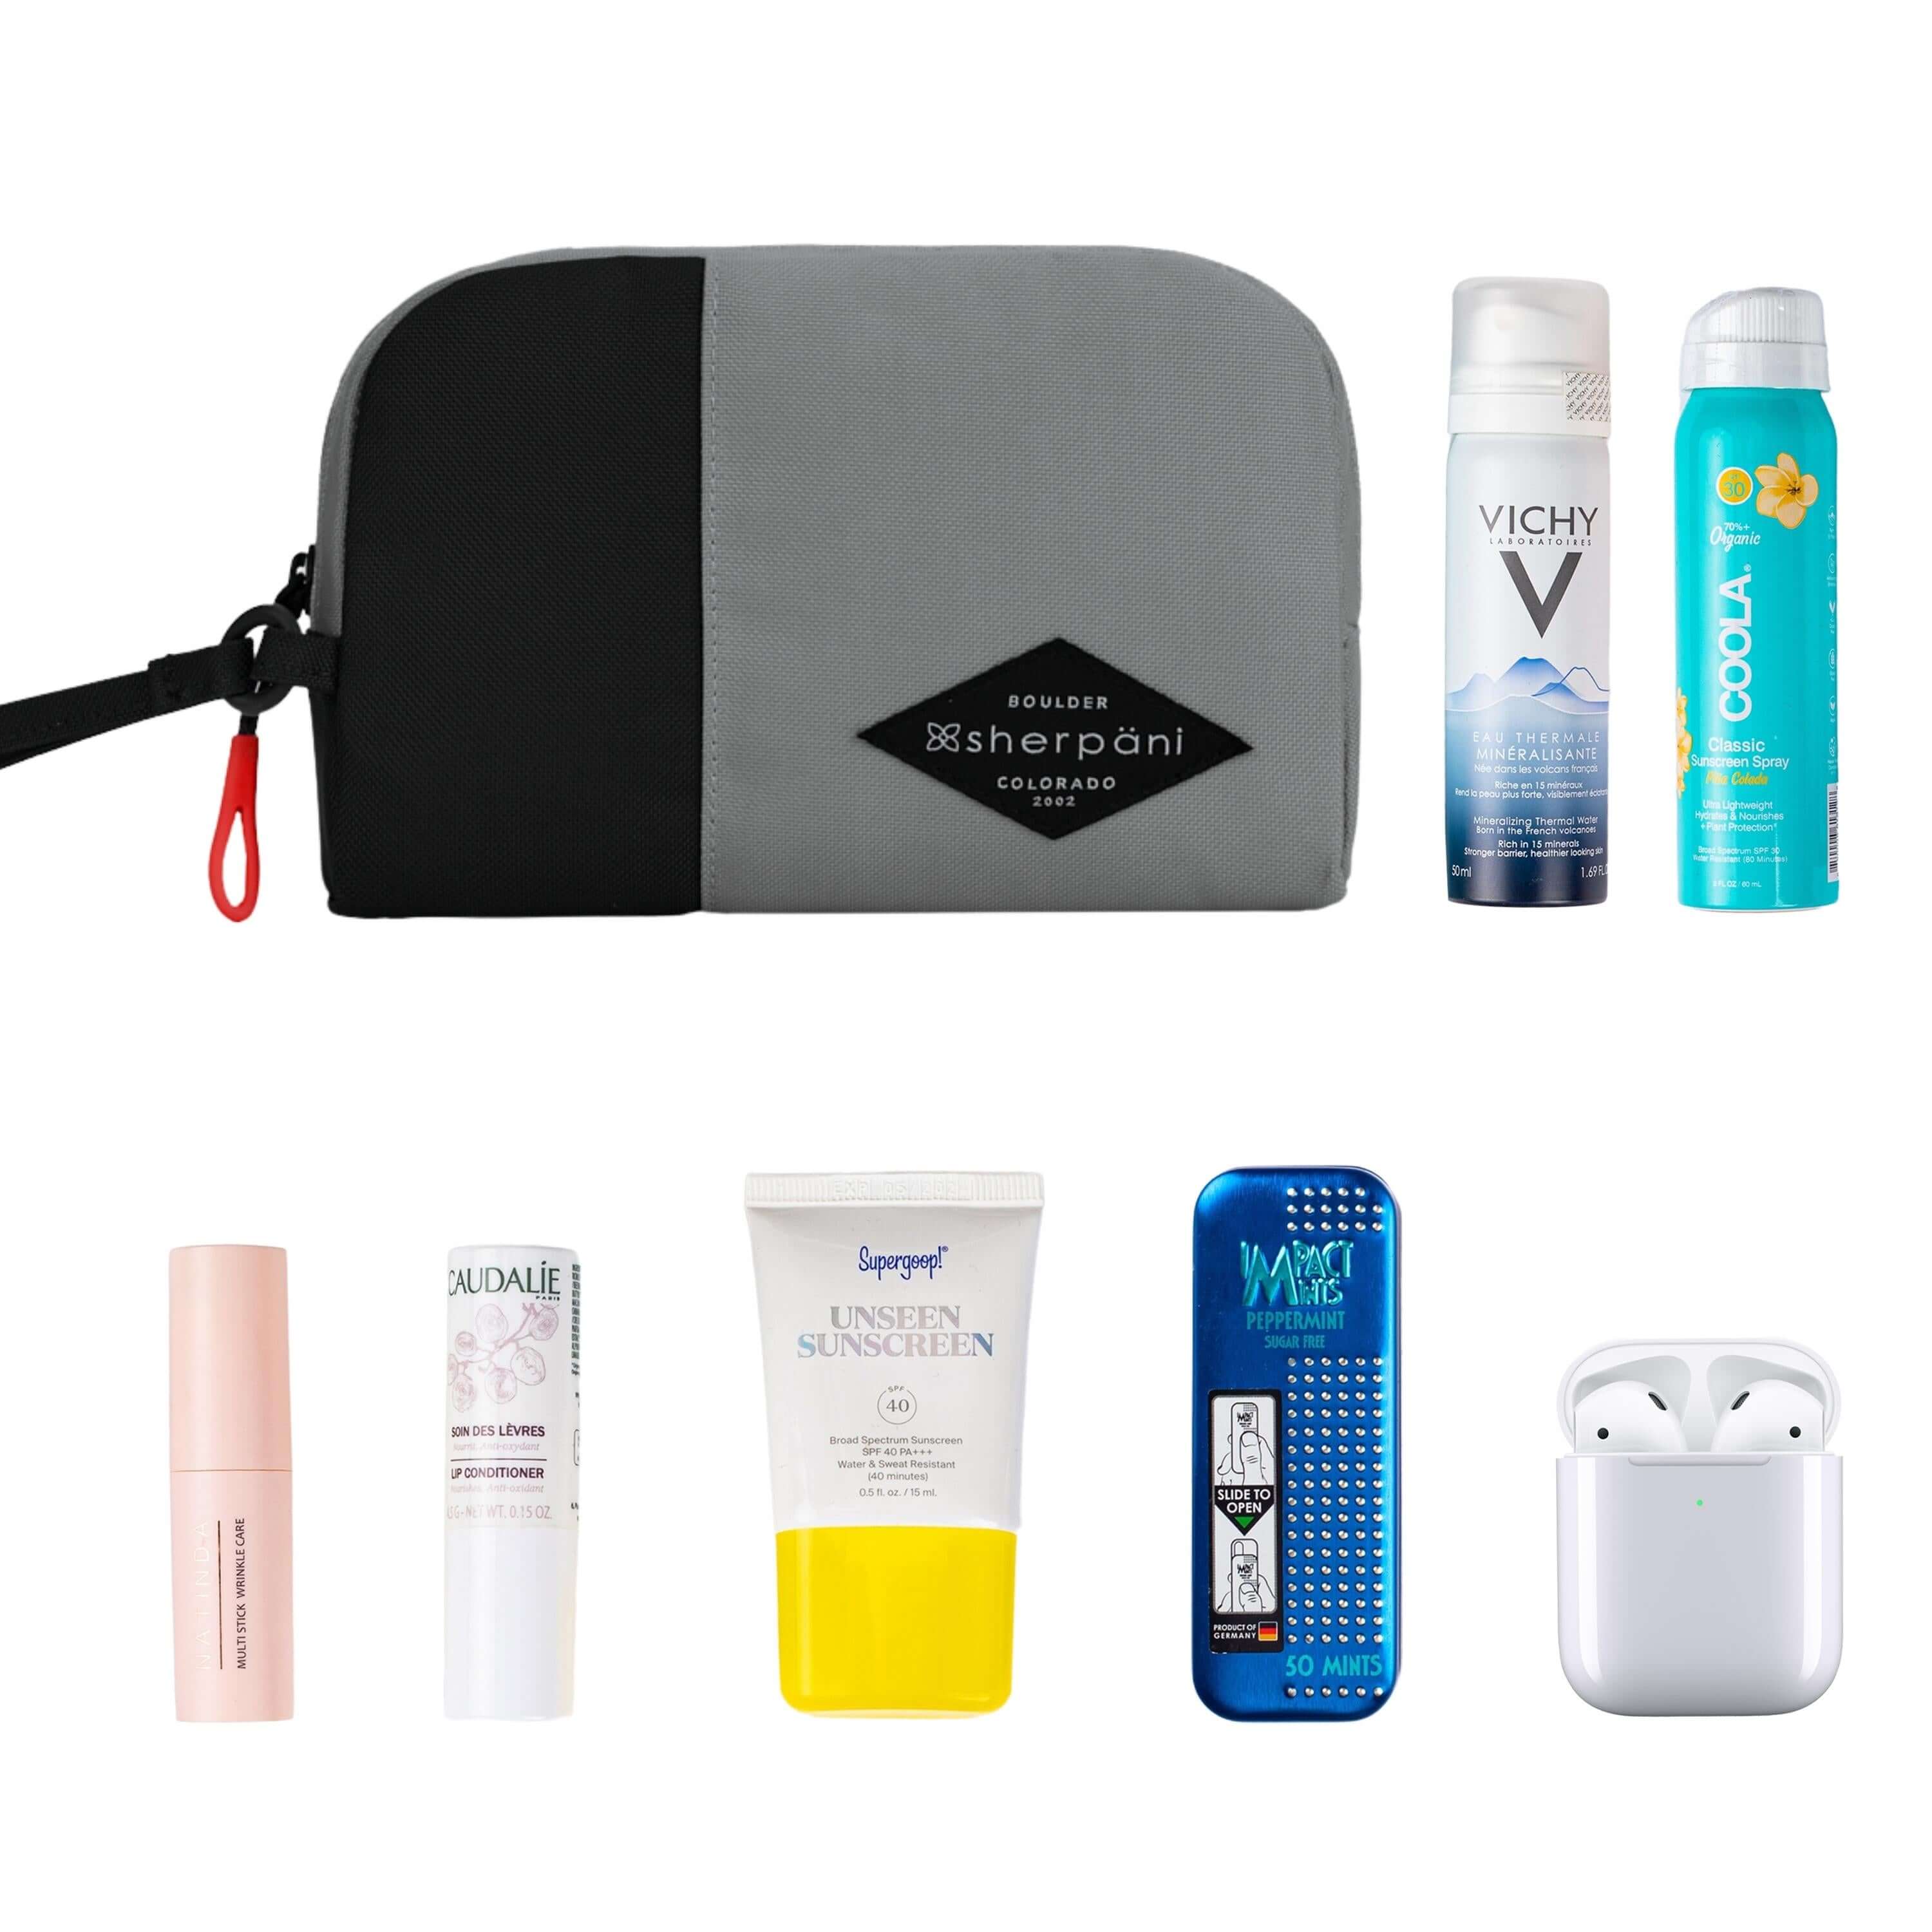 Top view of example items to fill the bag. Sherpani travel accessory, the Jolie in Stone in medium size, lies in the upper left corner. It is surrounded by an assortment of items: beauty products, skincare products, sunscreen, mints and AirPods.